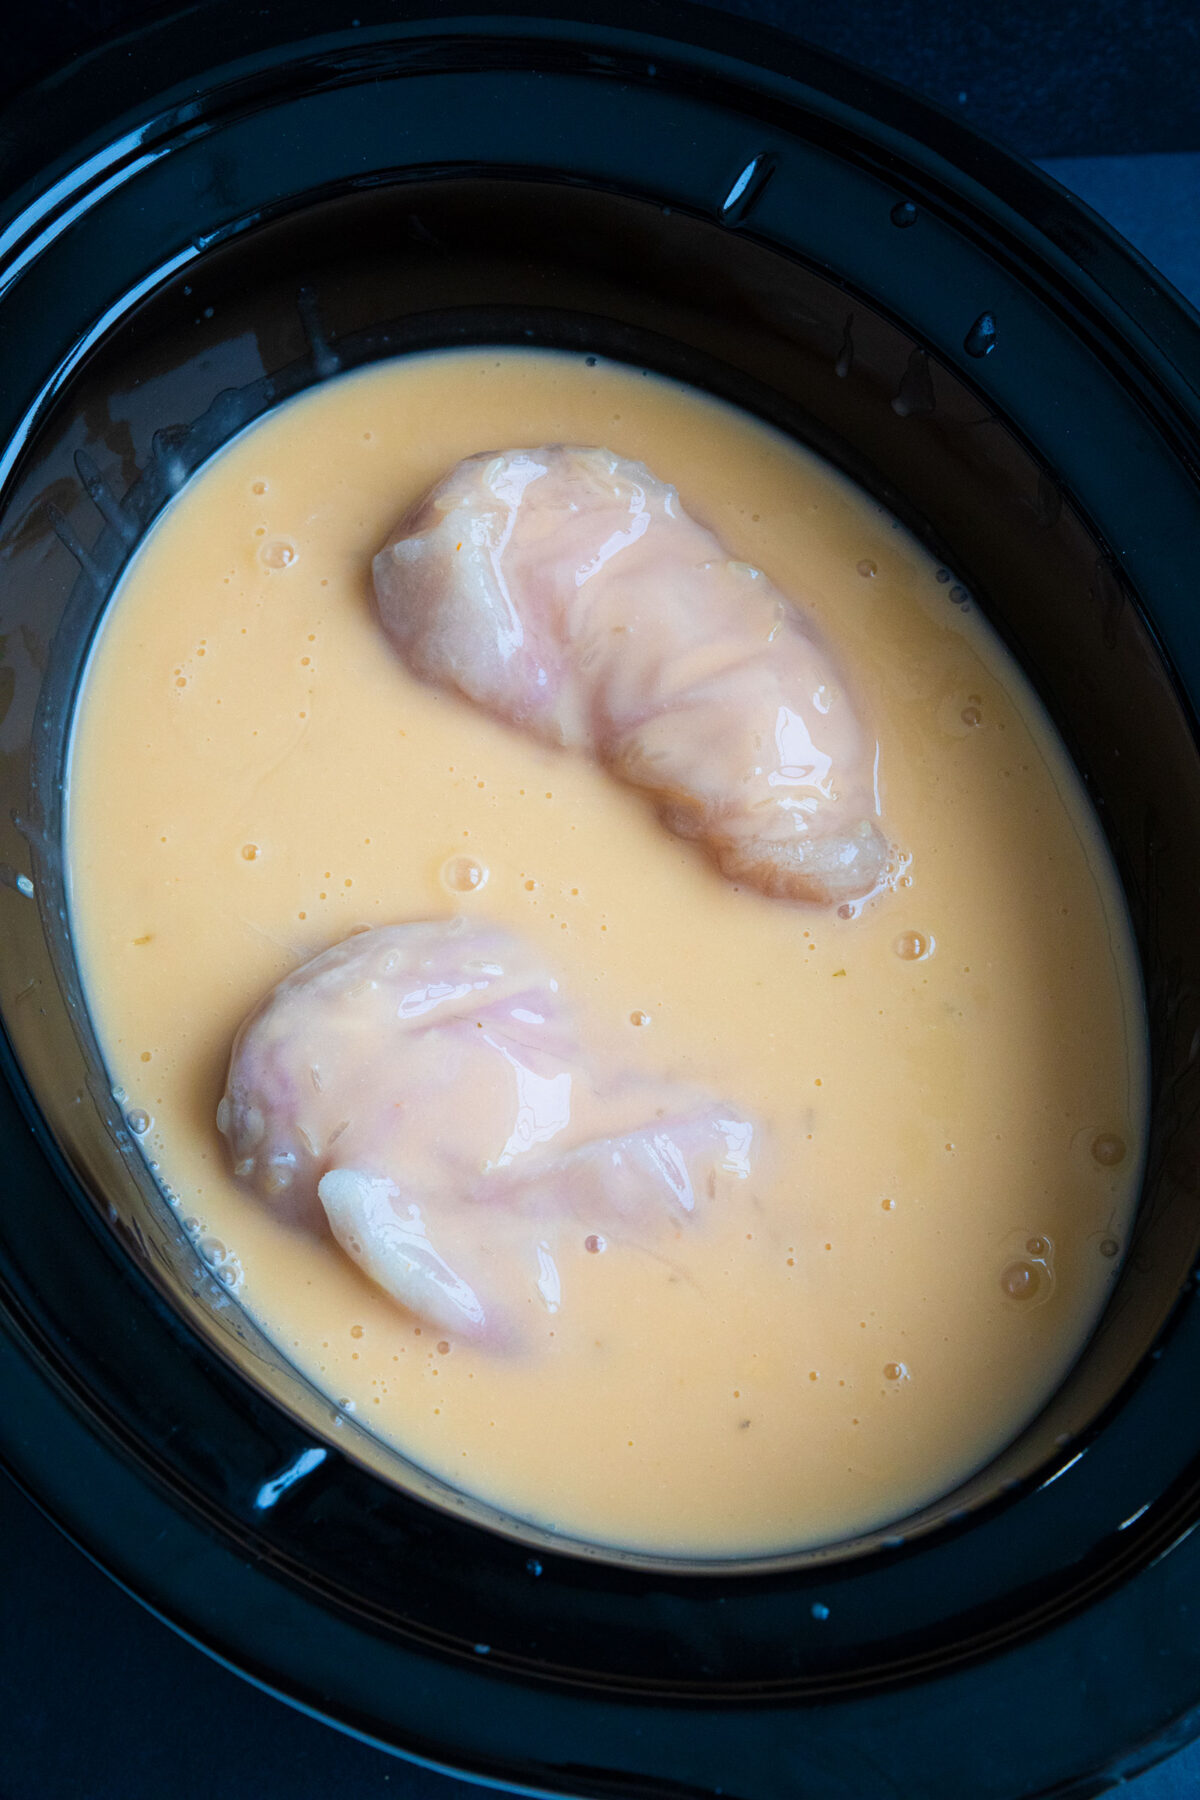 rice and cheese sauce poured on top of chicken breasts in slow cooker